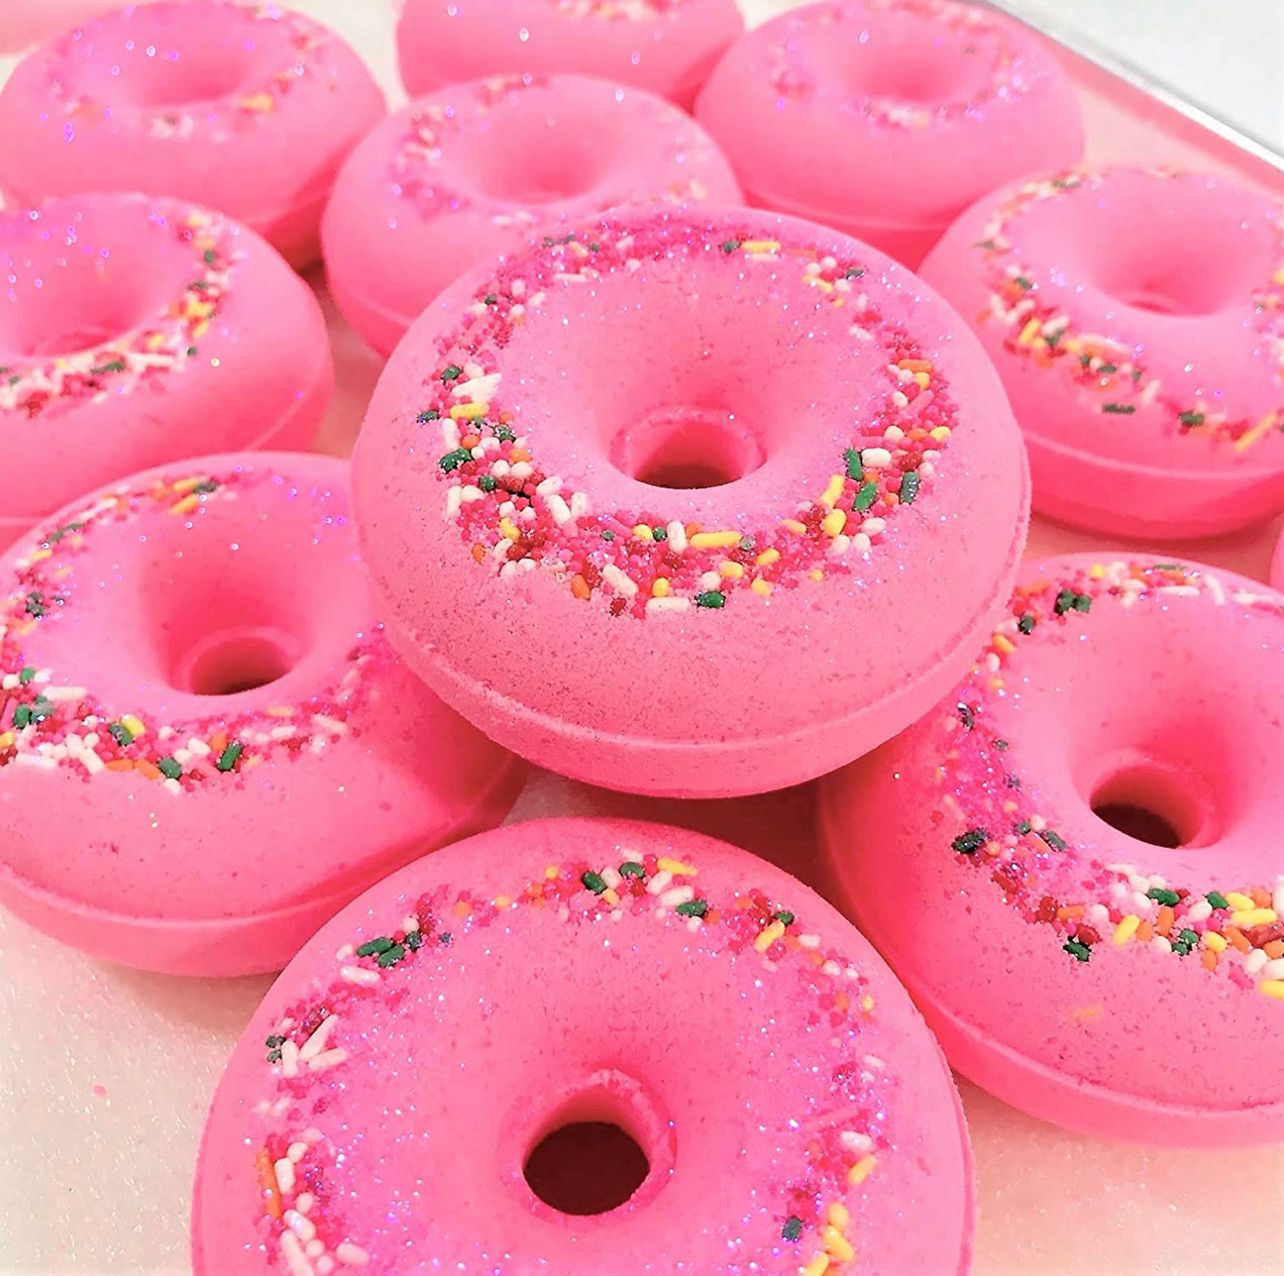 Hot pink donut shaped bath baths laid onto a tray. Bath bombs have a sprinkle and glitter top.